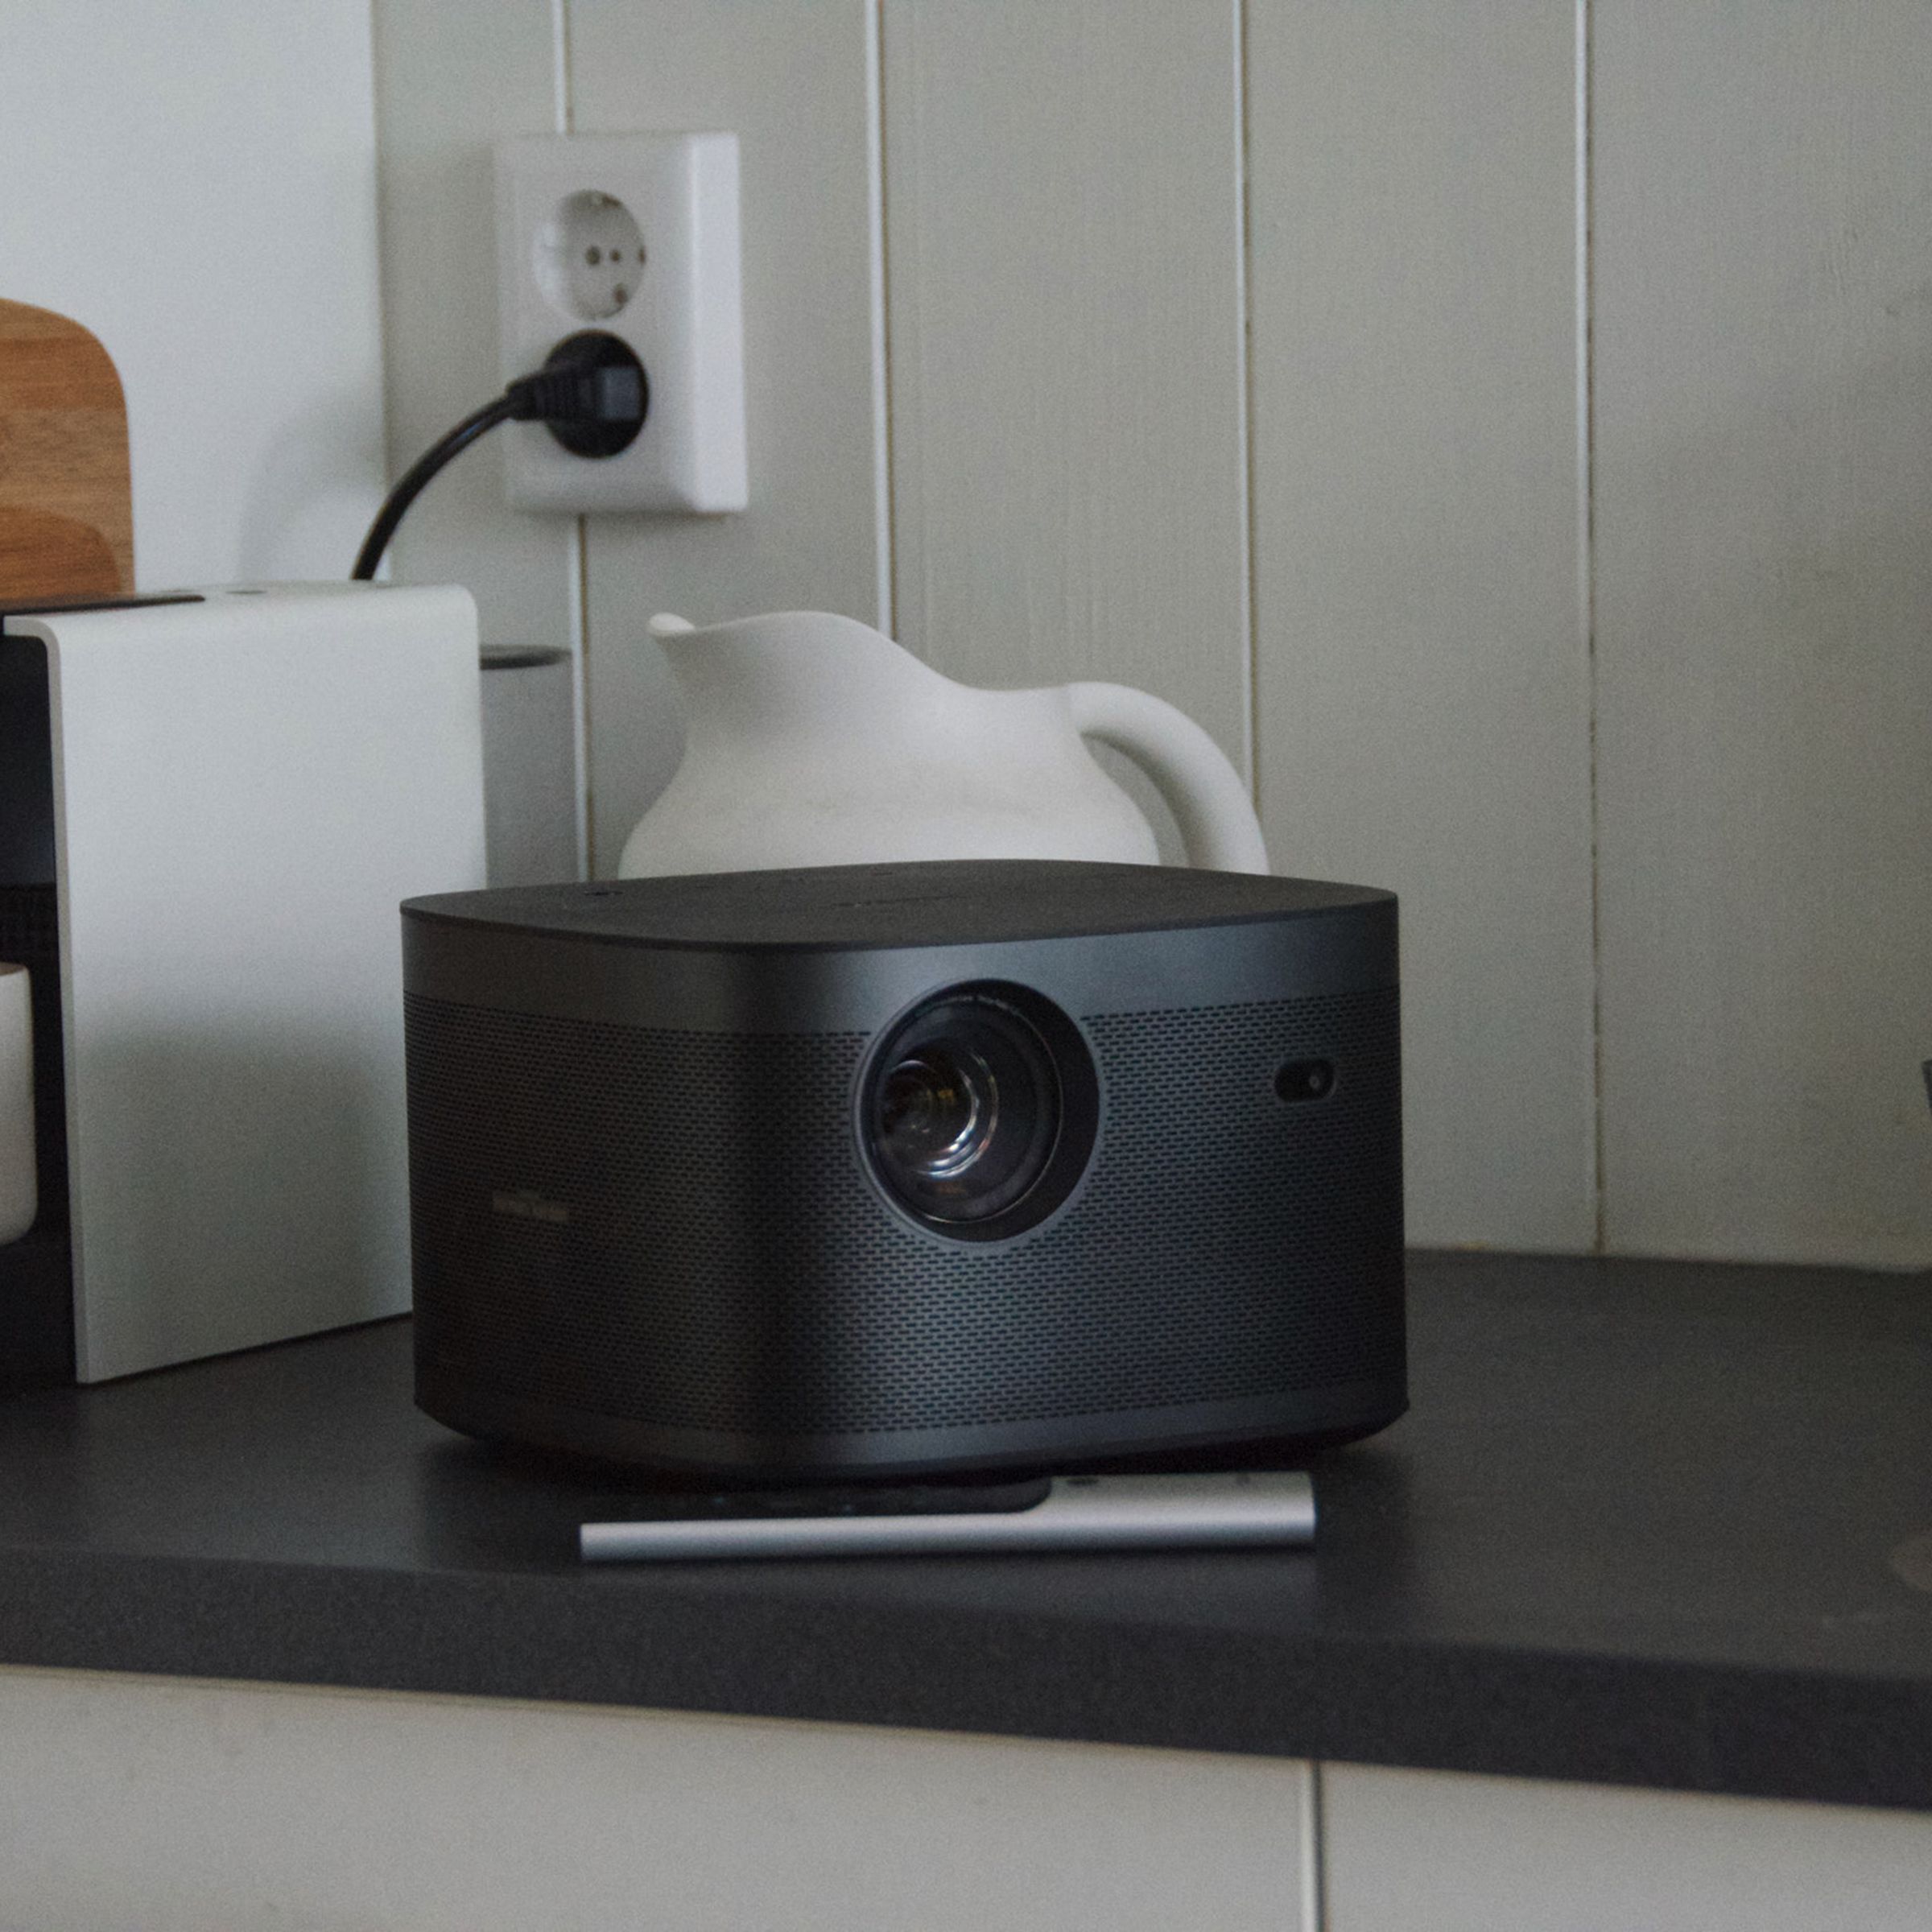 The Xgimi Horizon Pro is a lot of projector for $1,699.